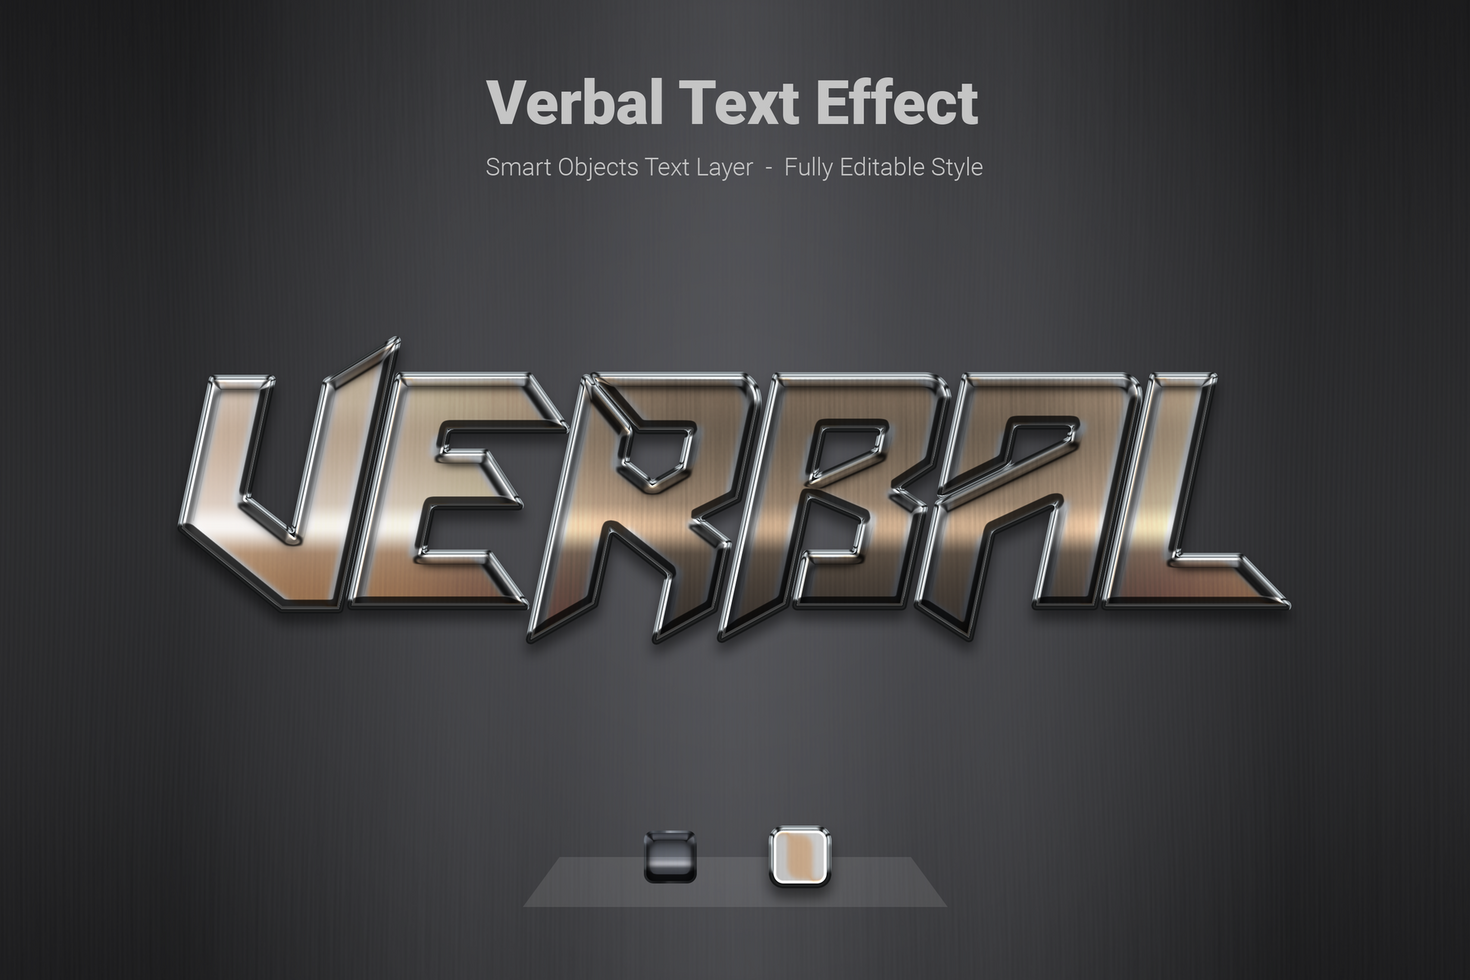 Verbal Text Style Effect Mockup Template psd